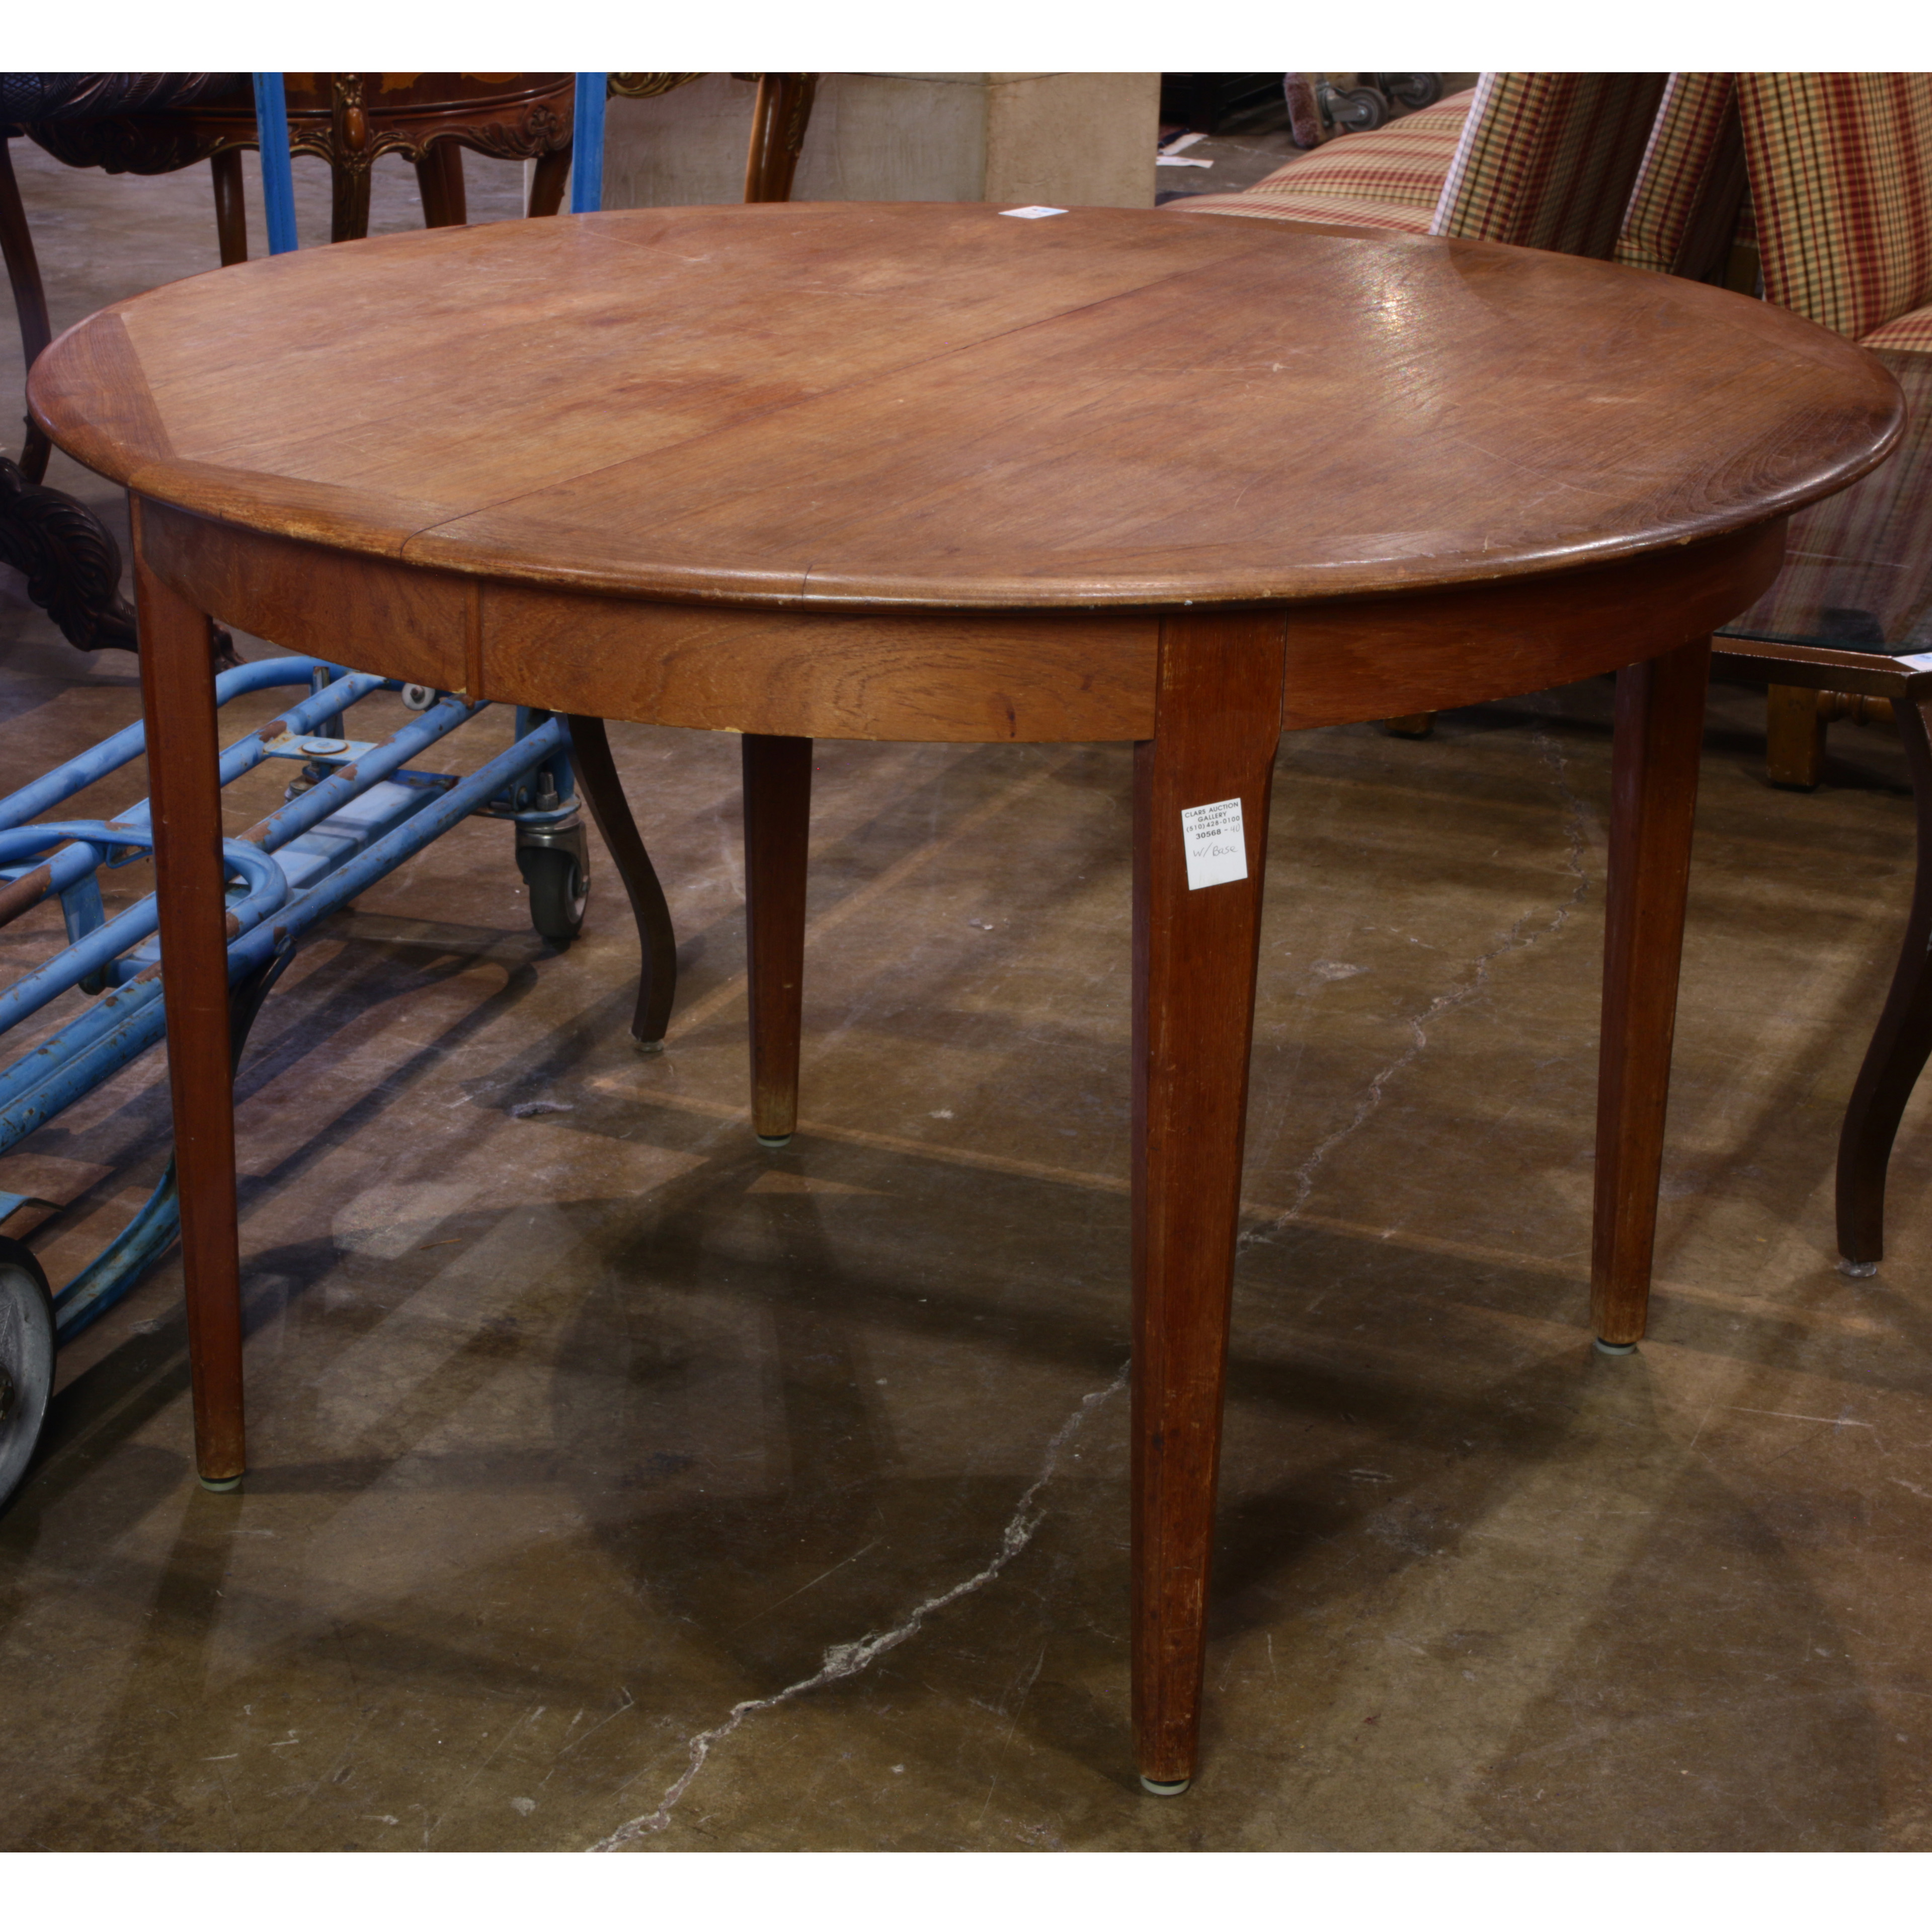 MID CENTURY MODERN DINING TABLE 3a4fb8